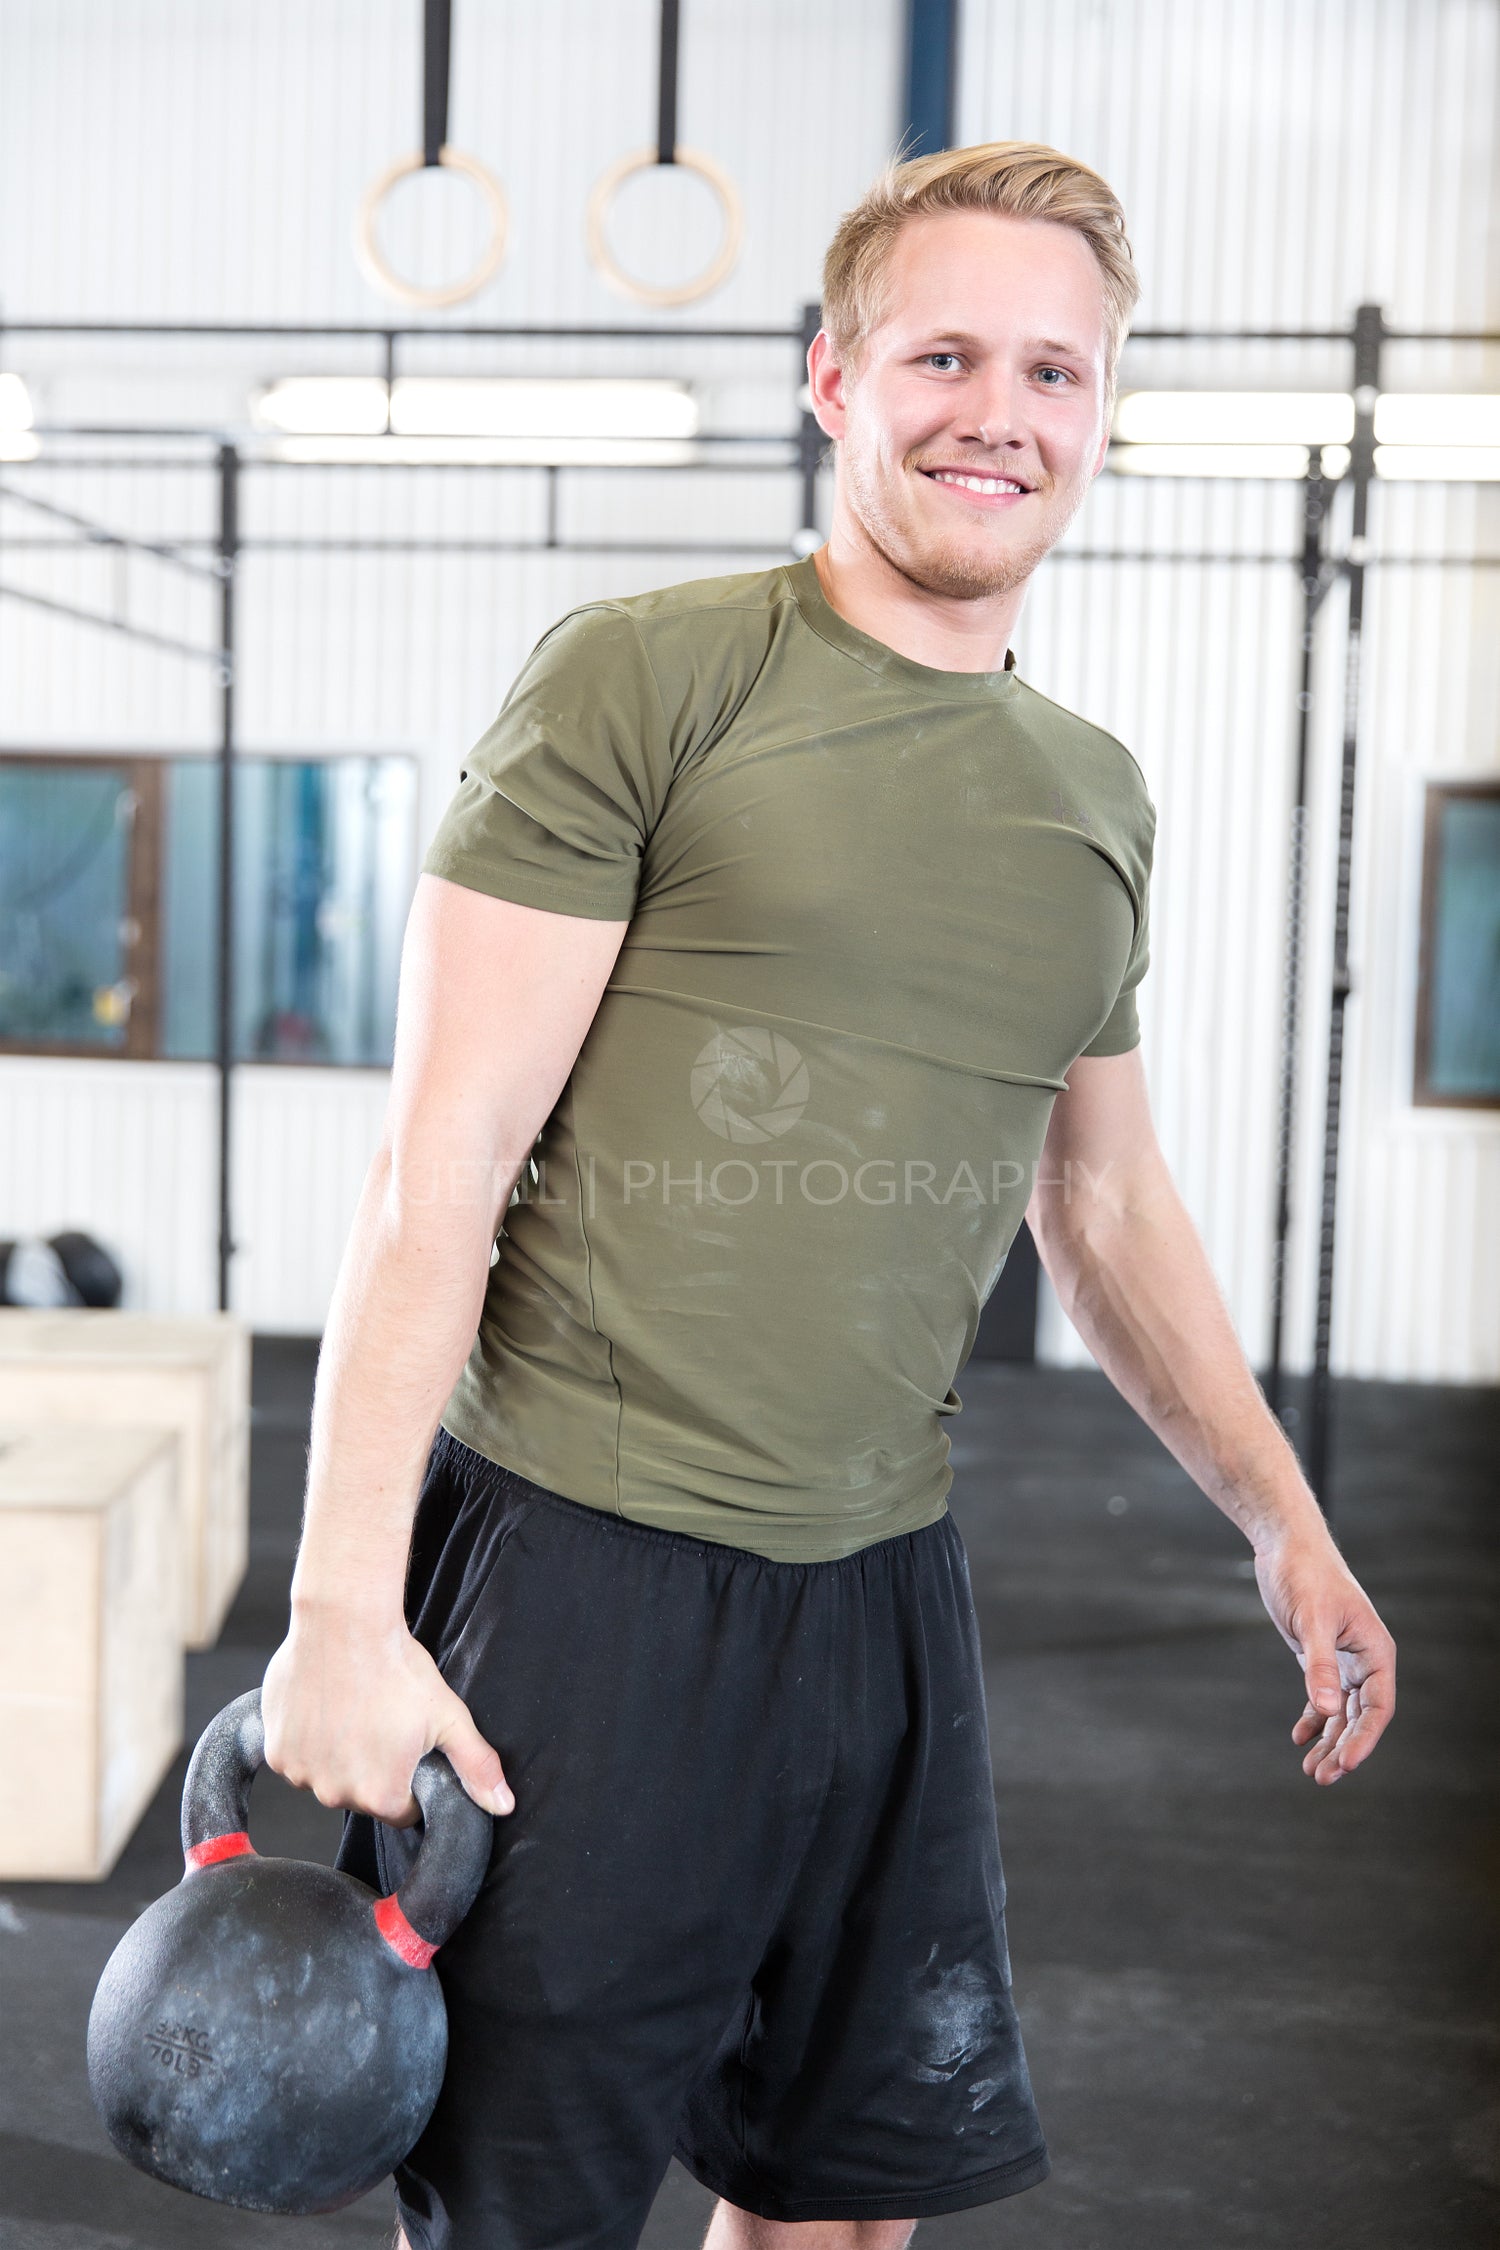 Well trained man with kettlebell at fitness gym